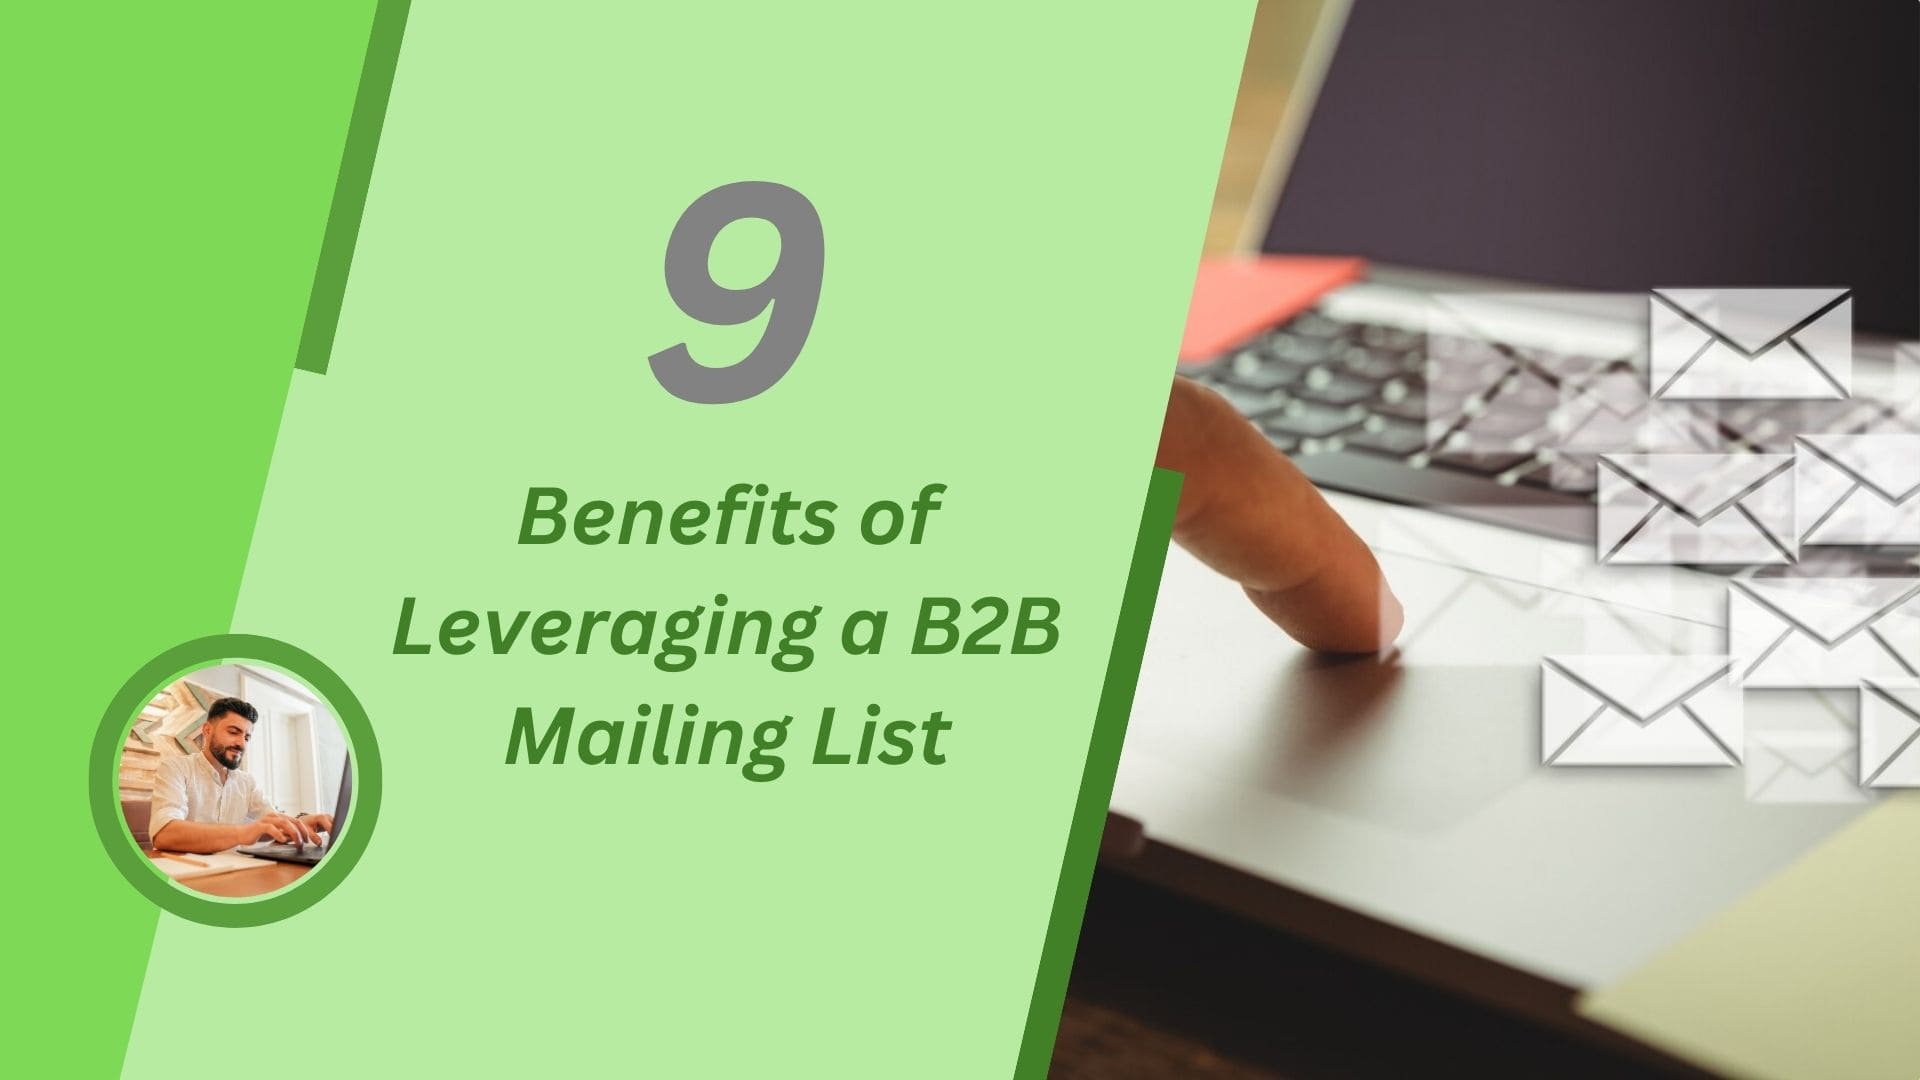 9 Benefits of Leveraging a B2B Mailing List An Overview